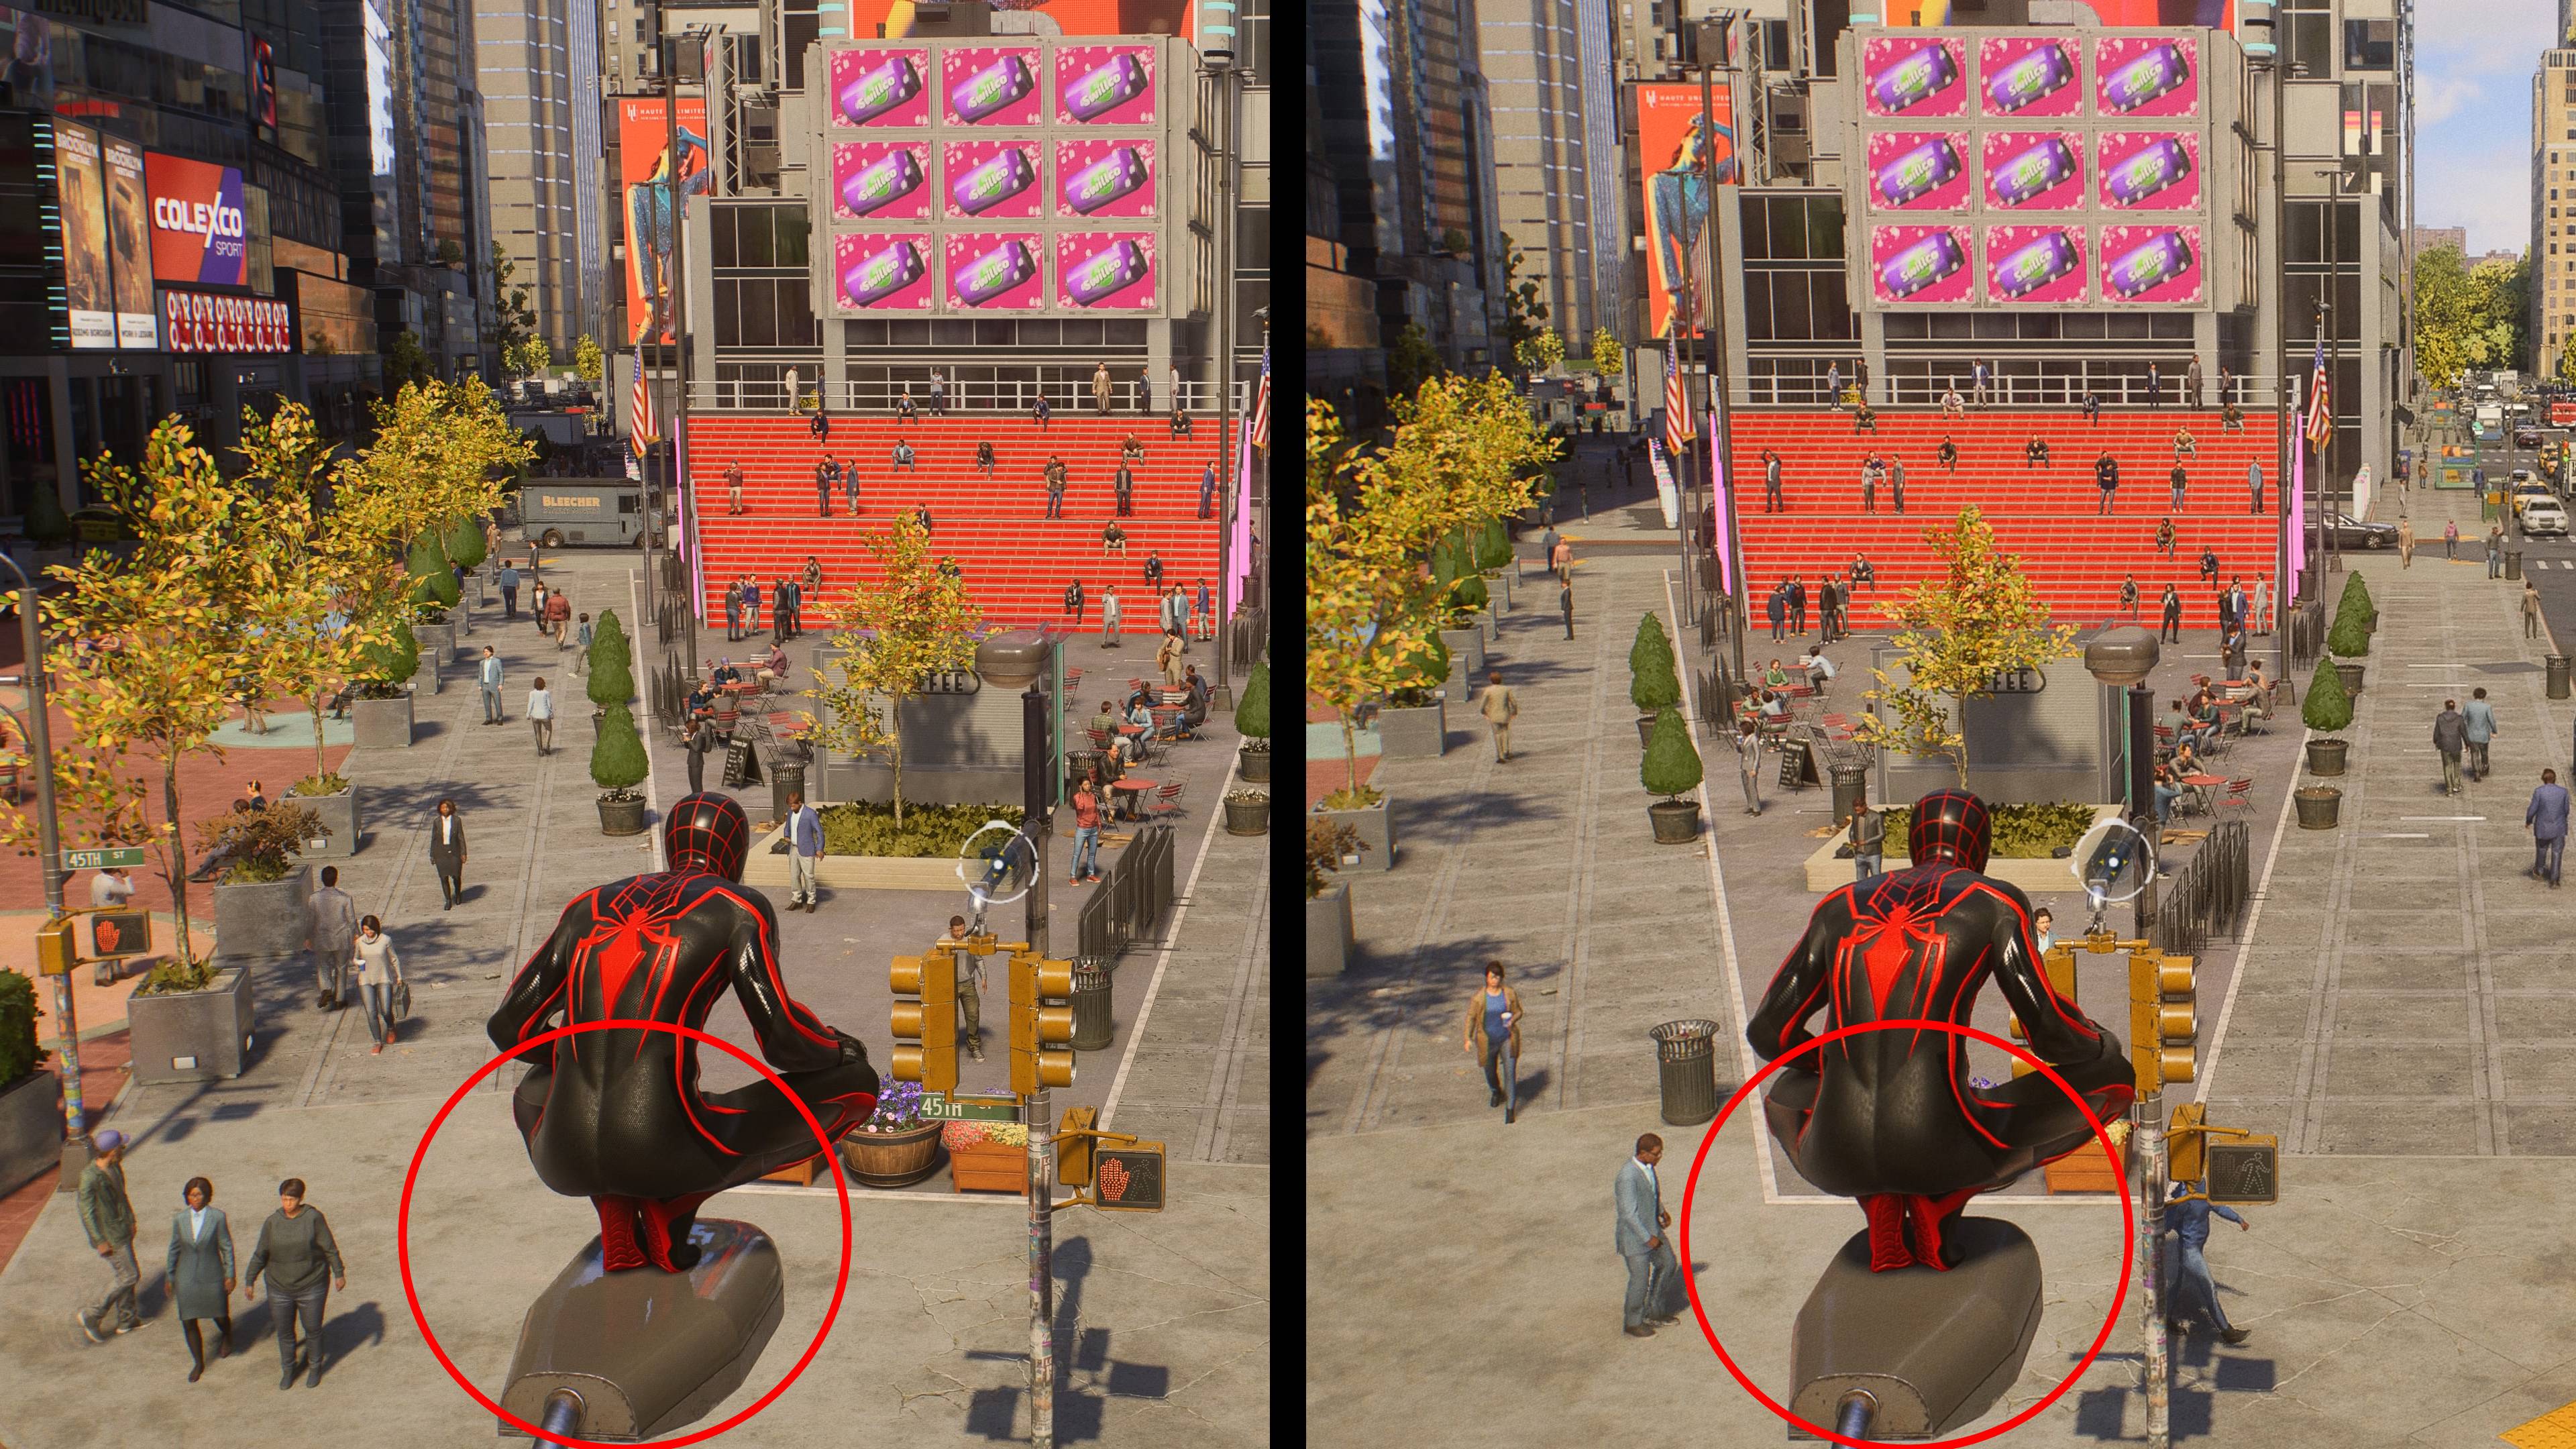 Marvel's Spider-Man 2 Photo Mode features detailed: tips to get started –  PlayStation.Blog